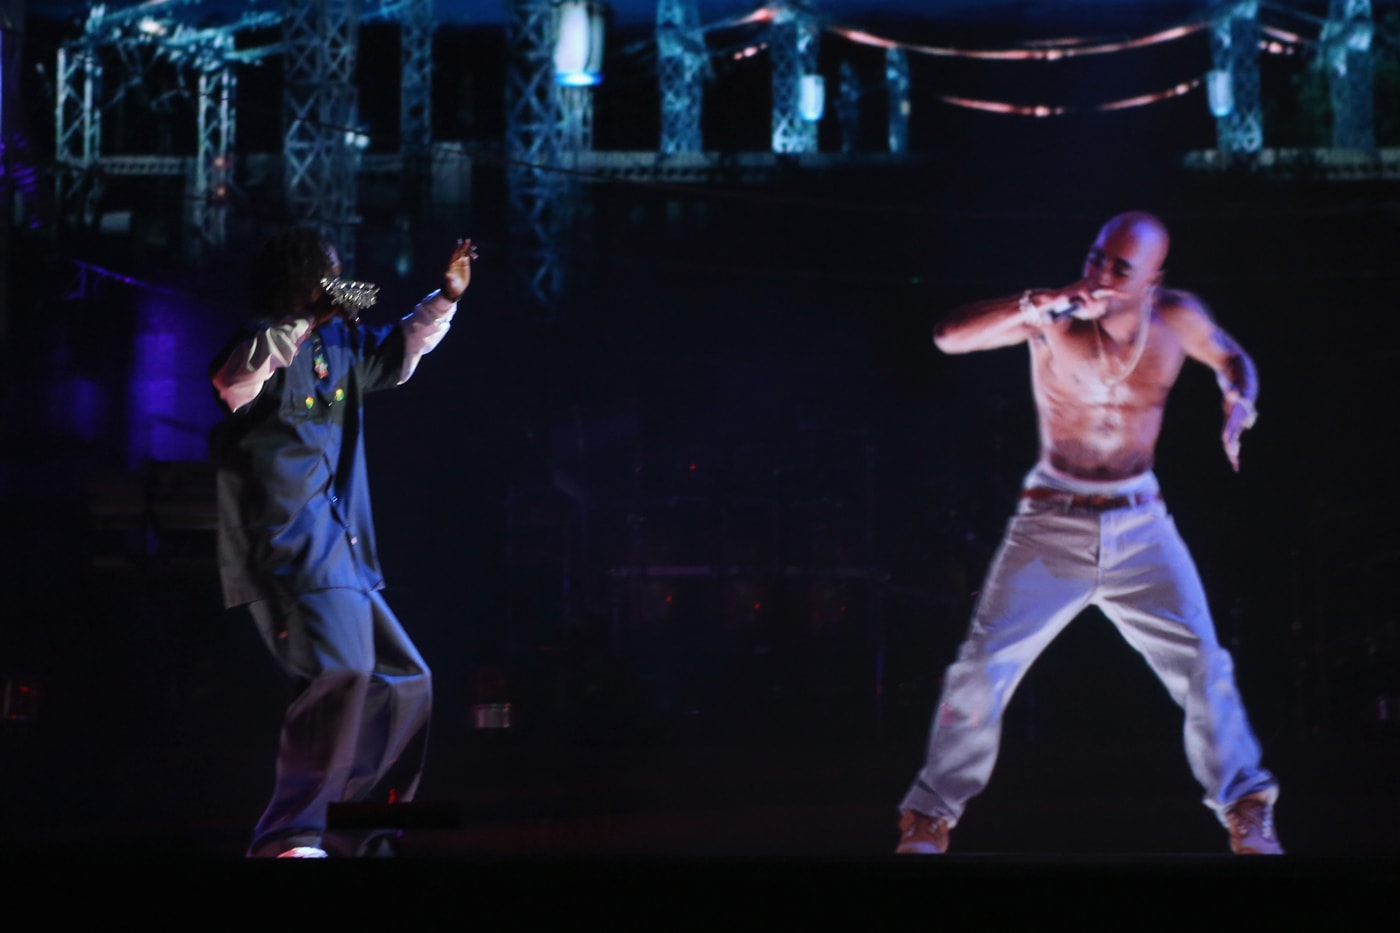 tupacs-hologram-coachella-performance-causes-huge-sales-rise-and-chart-reemergence